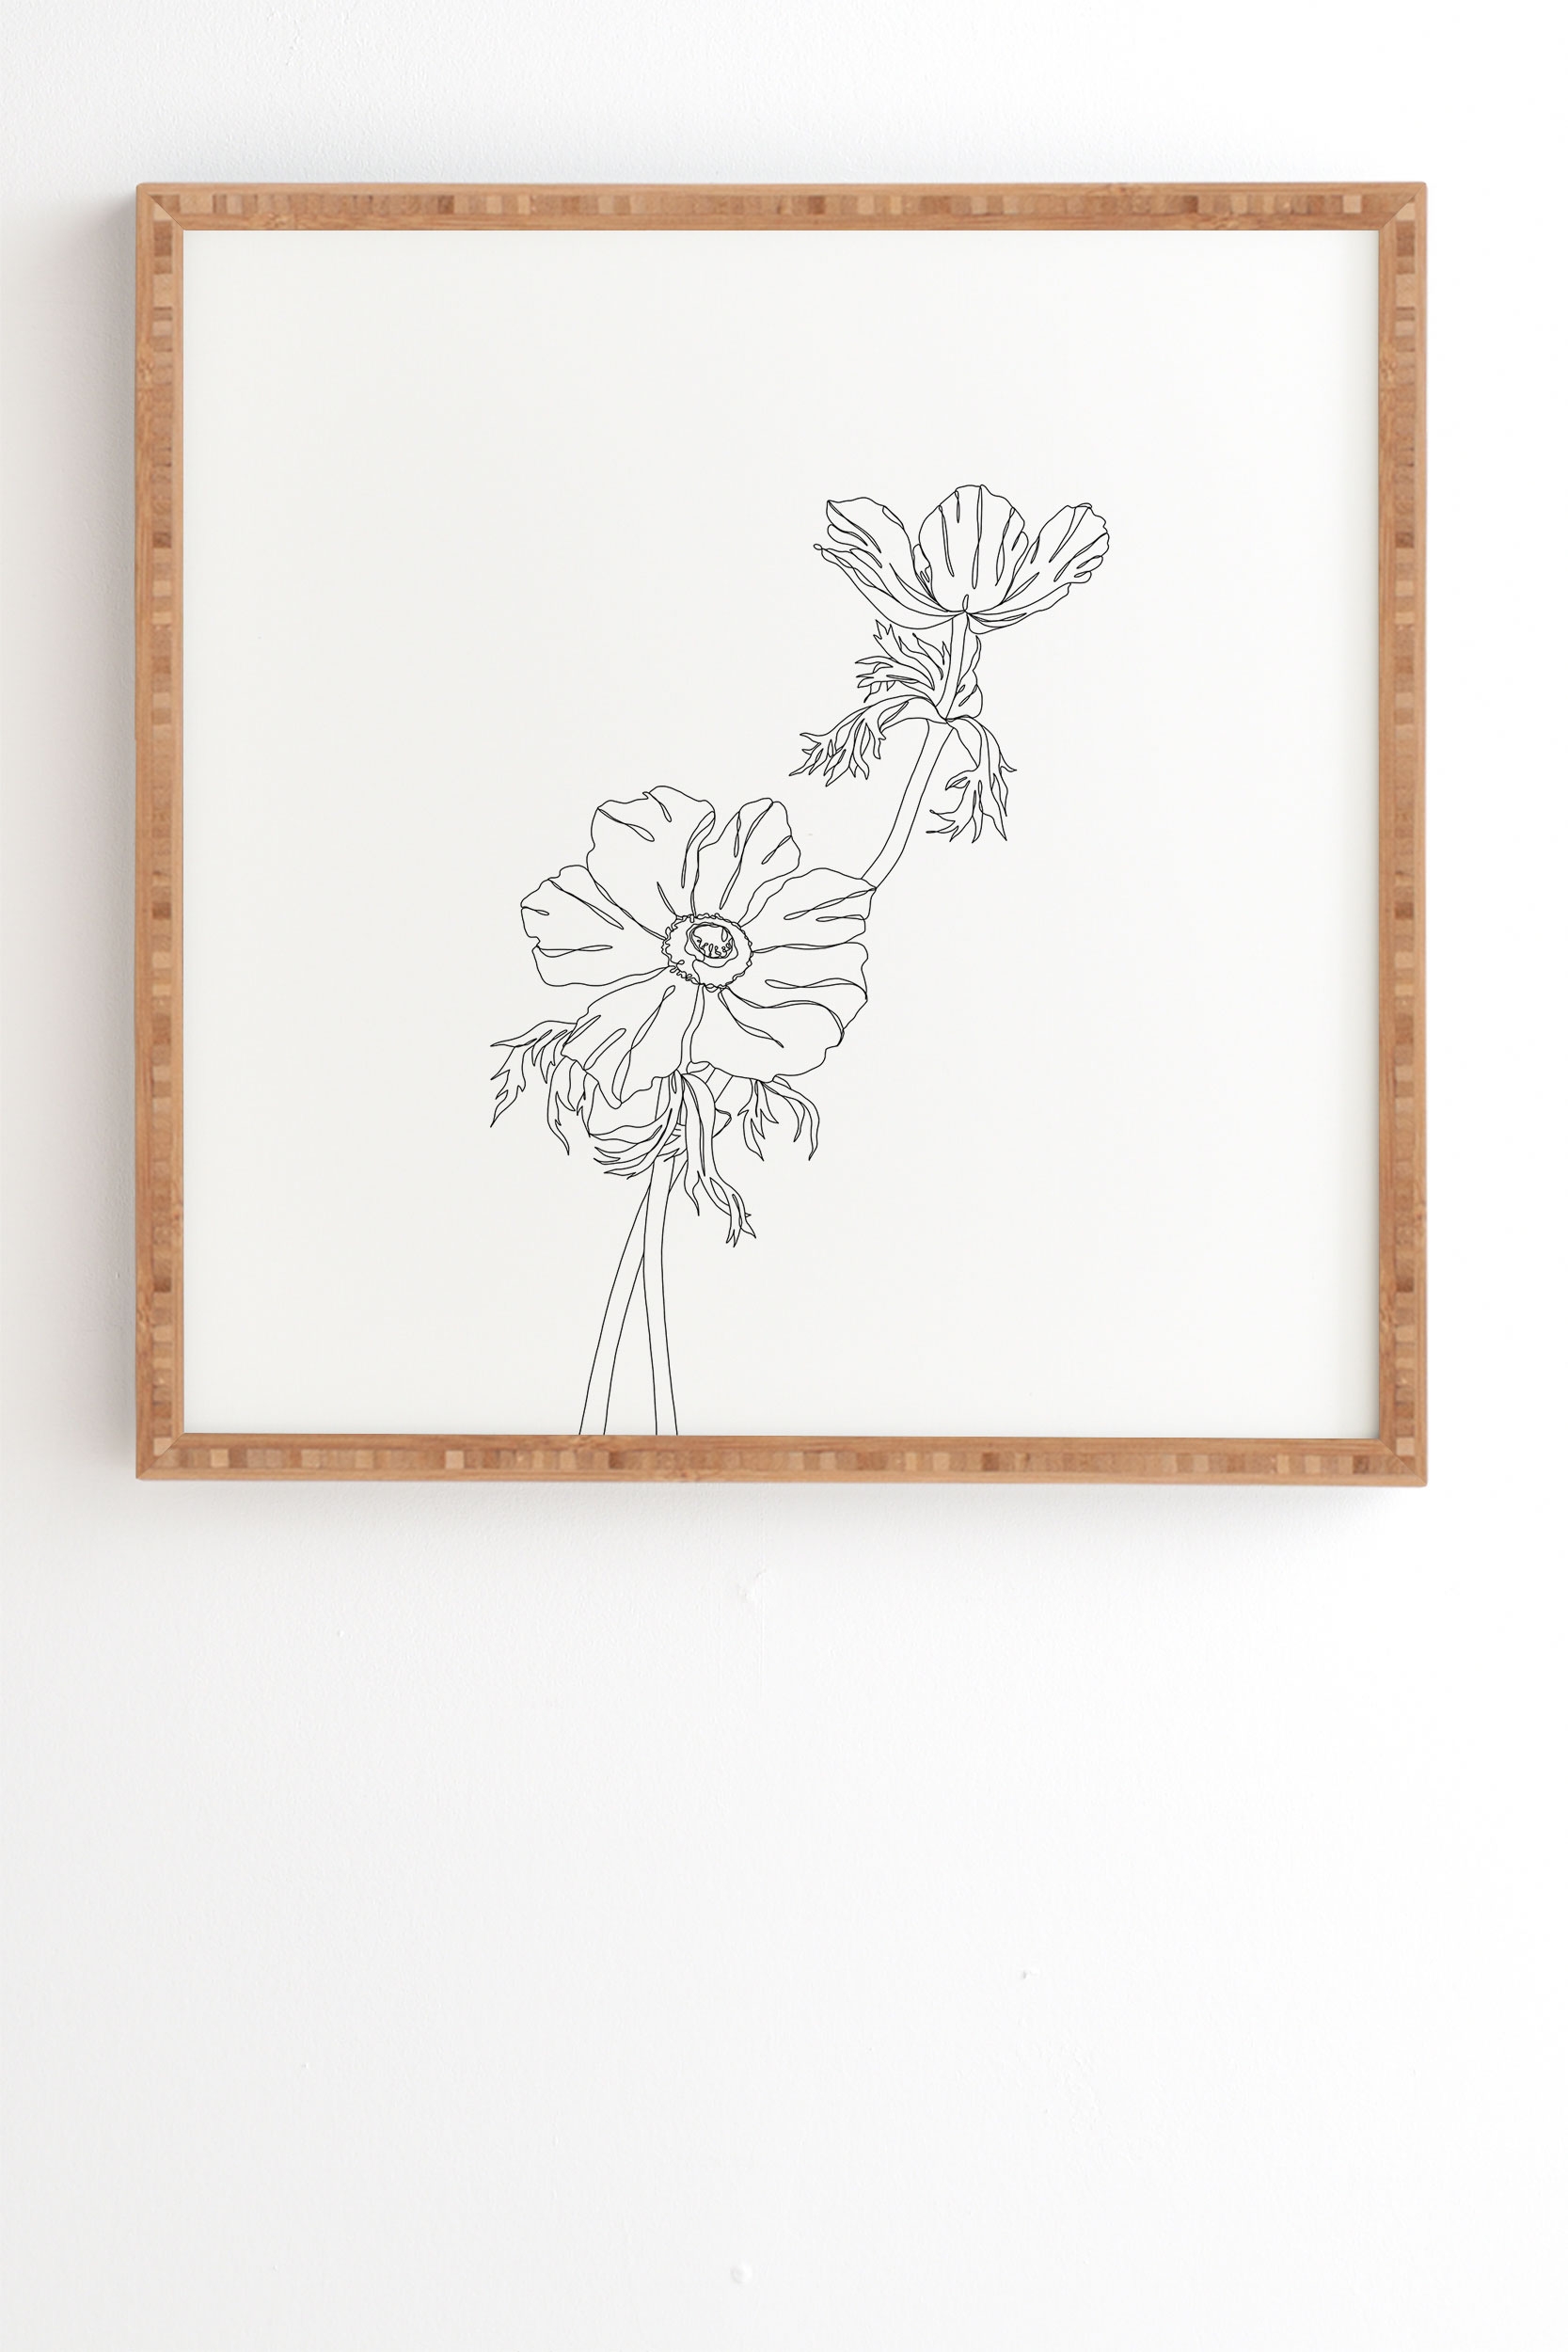 Botanical Illustration Joan by The Colour Study - Framed Wall Art Bamboo 14" x 16.5" - Image 1